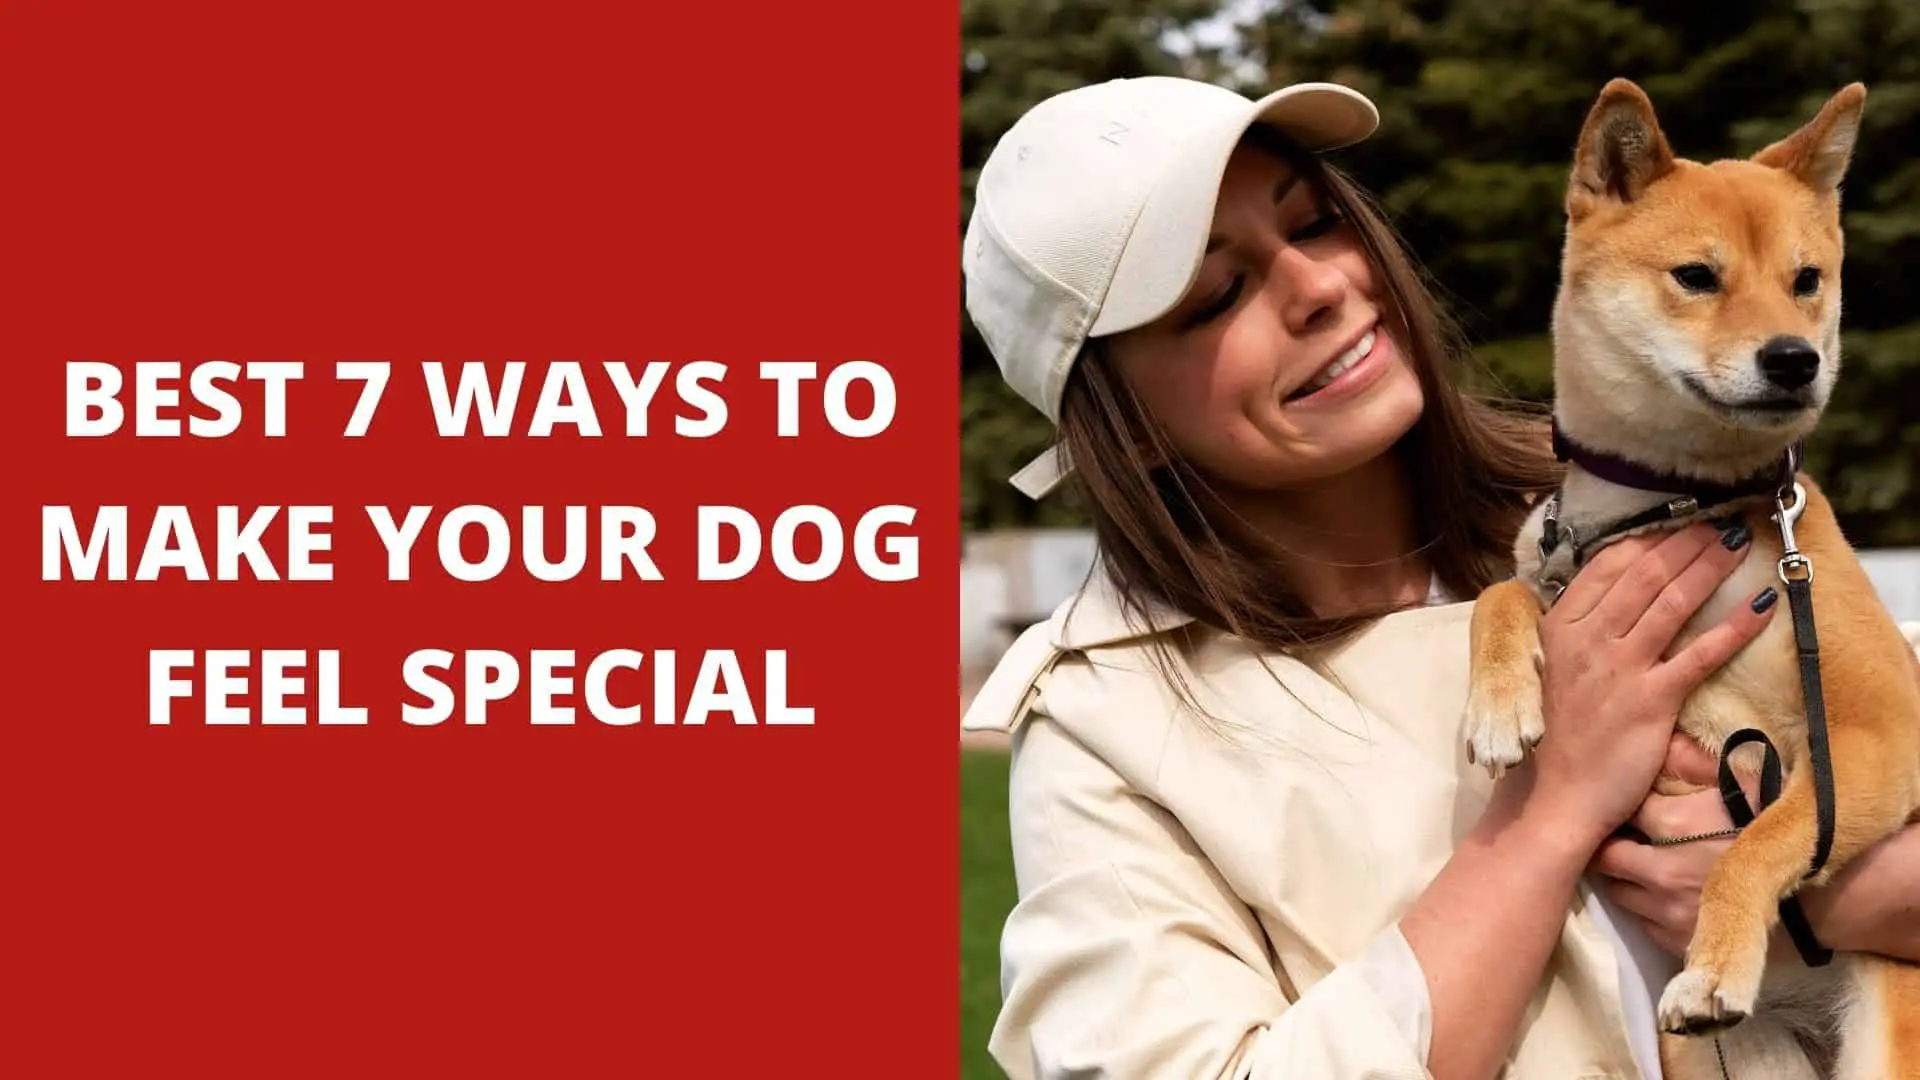 Best 7 Ways to Make Your Dog Feel Special